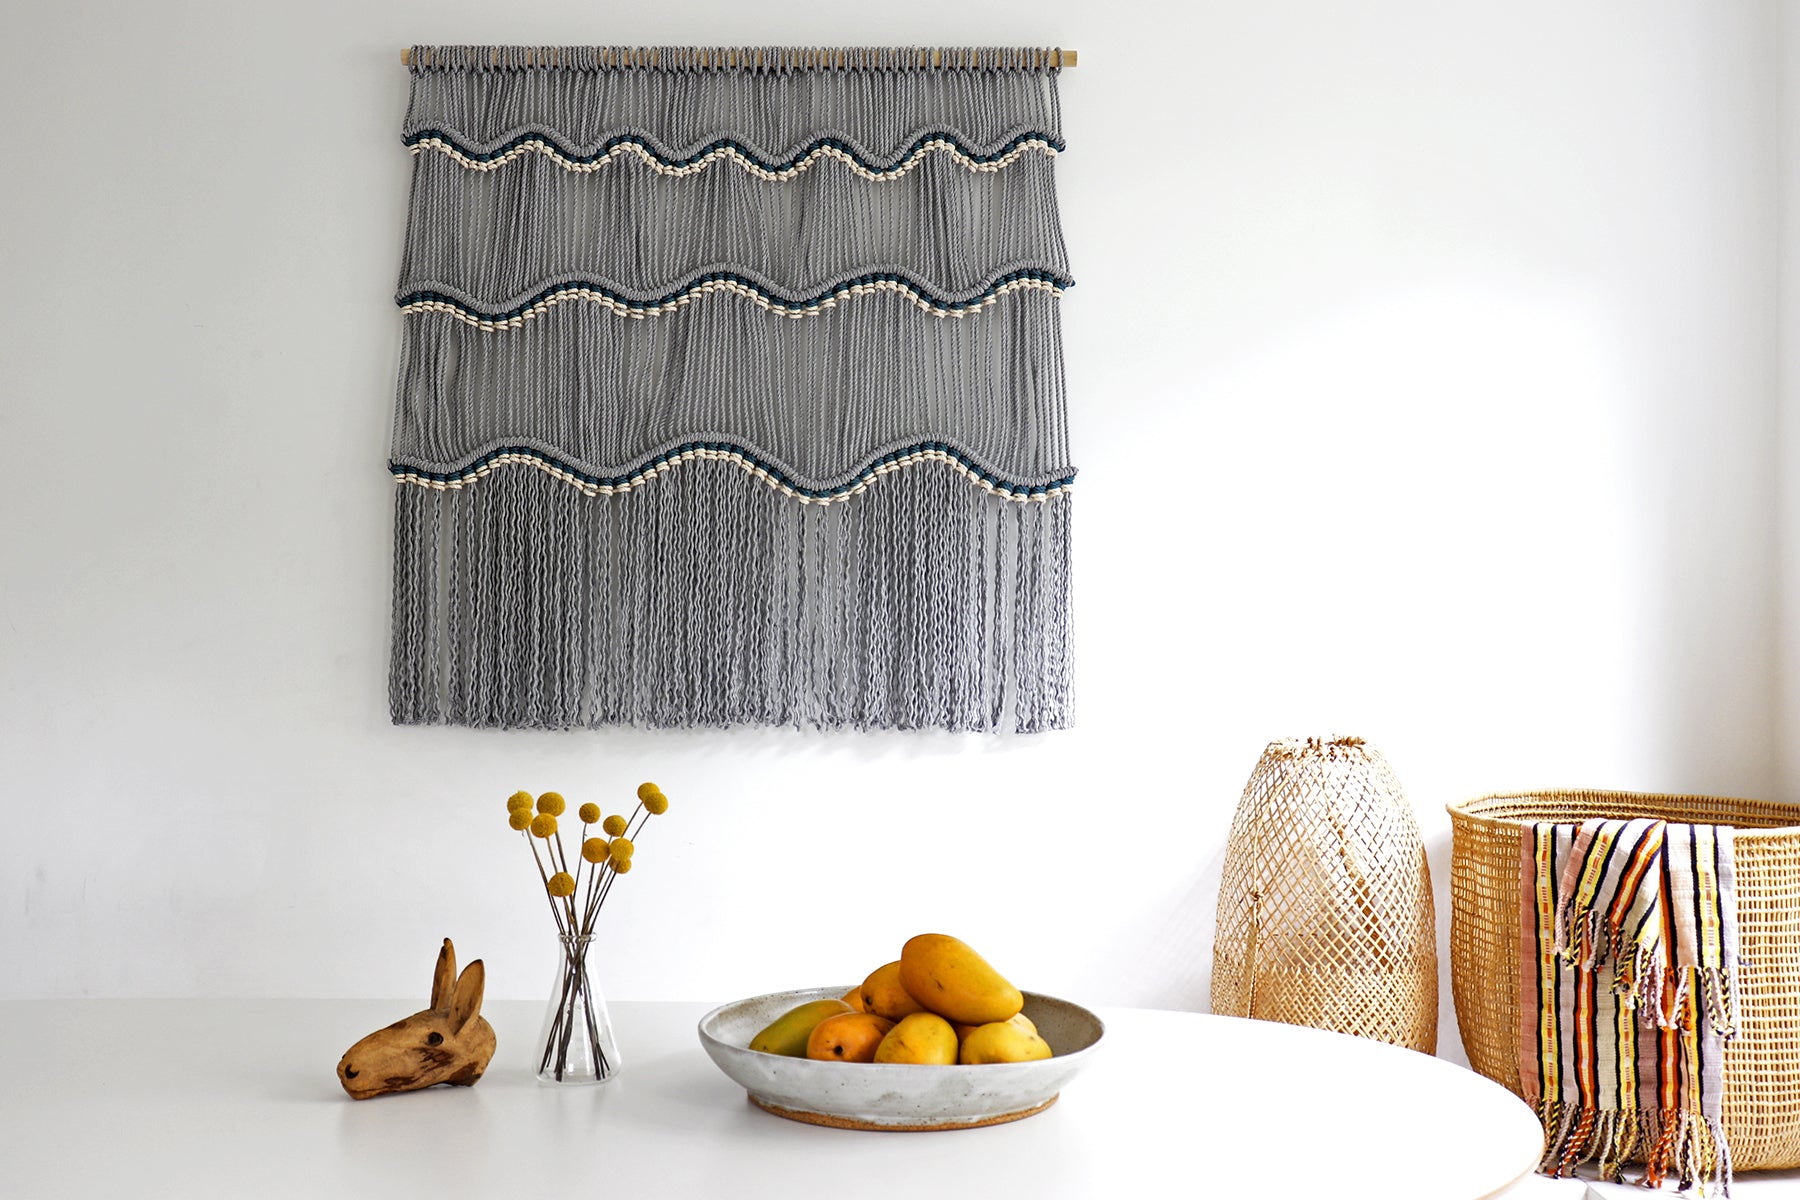 Guatemal Waves Macramé Pattern wall hanging is a fun diy project using 5mm cotton rope and a wooden dowel